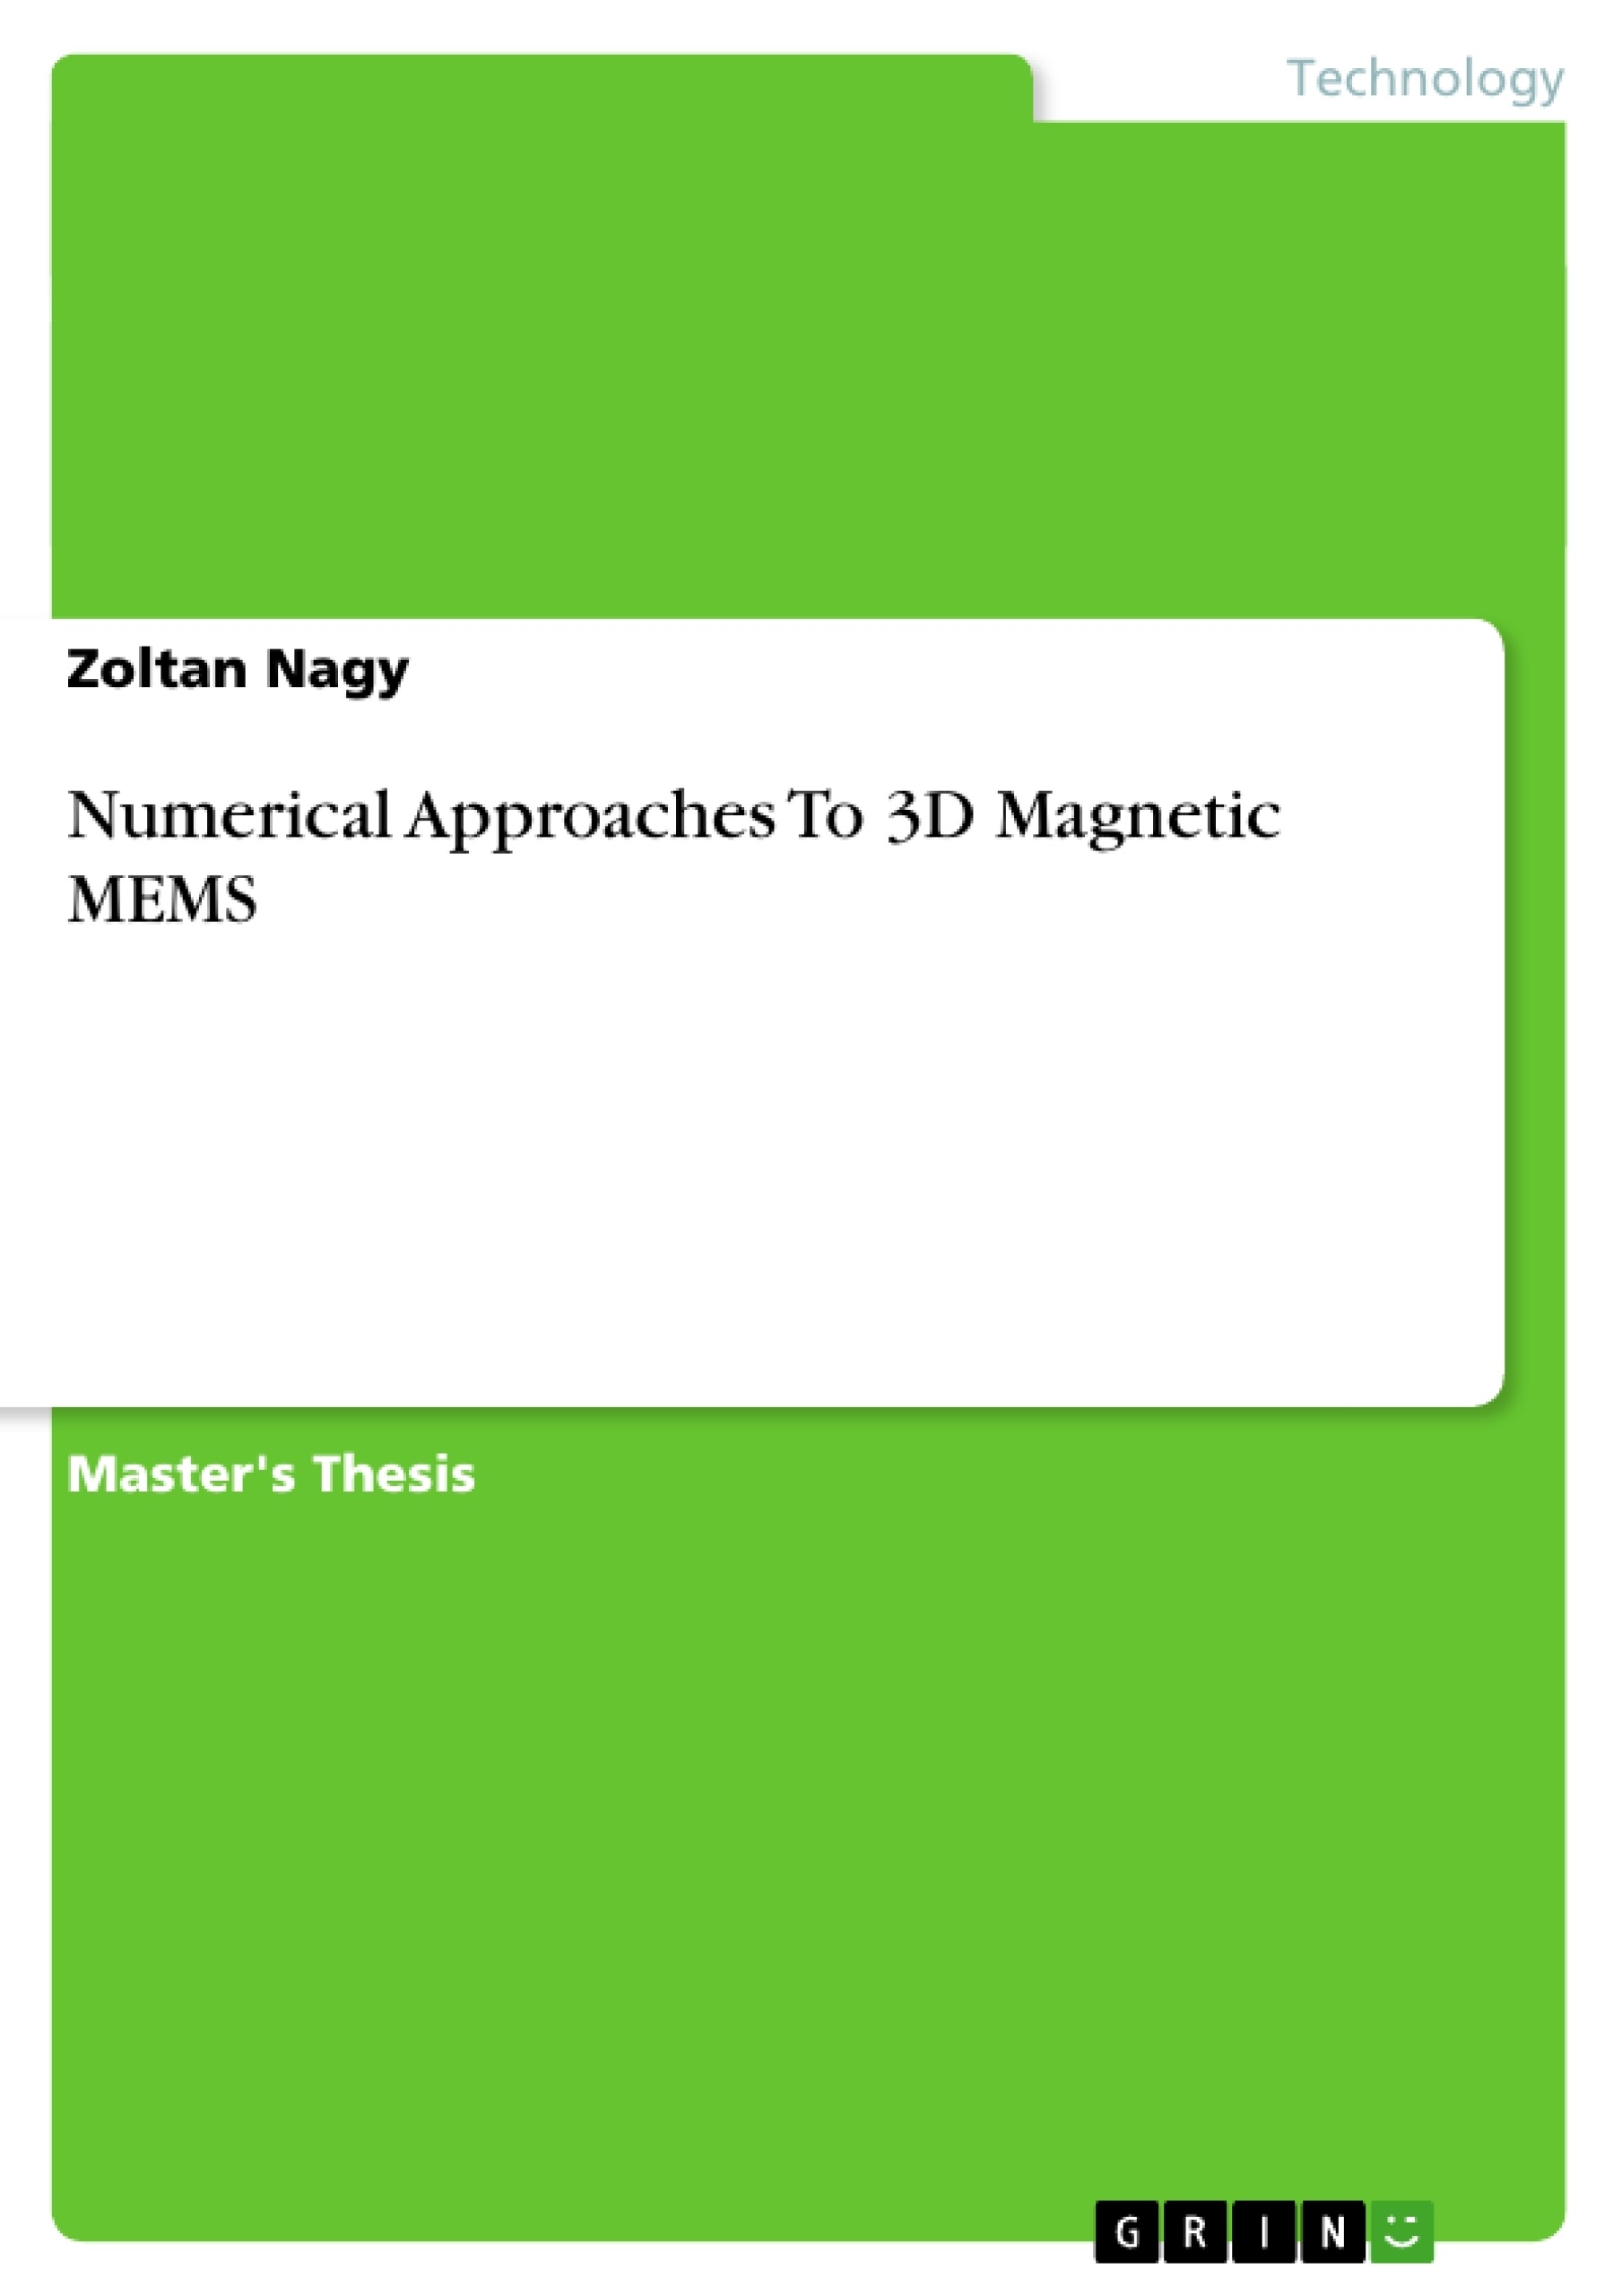 Title: Numerical Approaches To 3D Magnetic MEMS